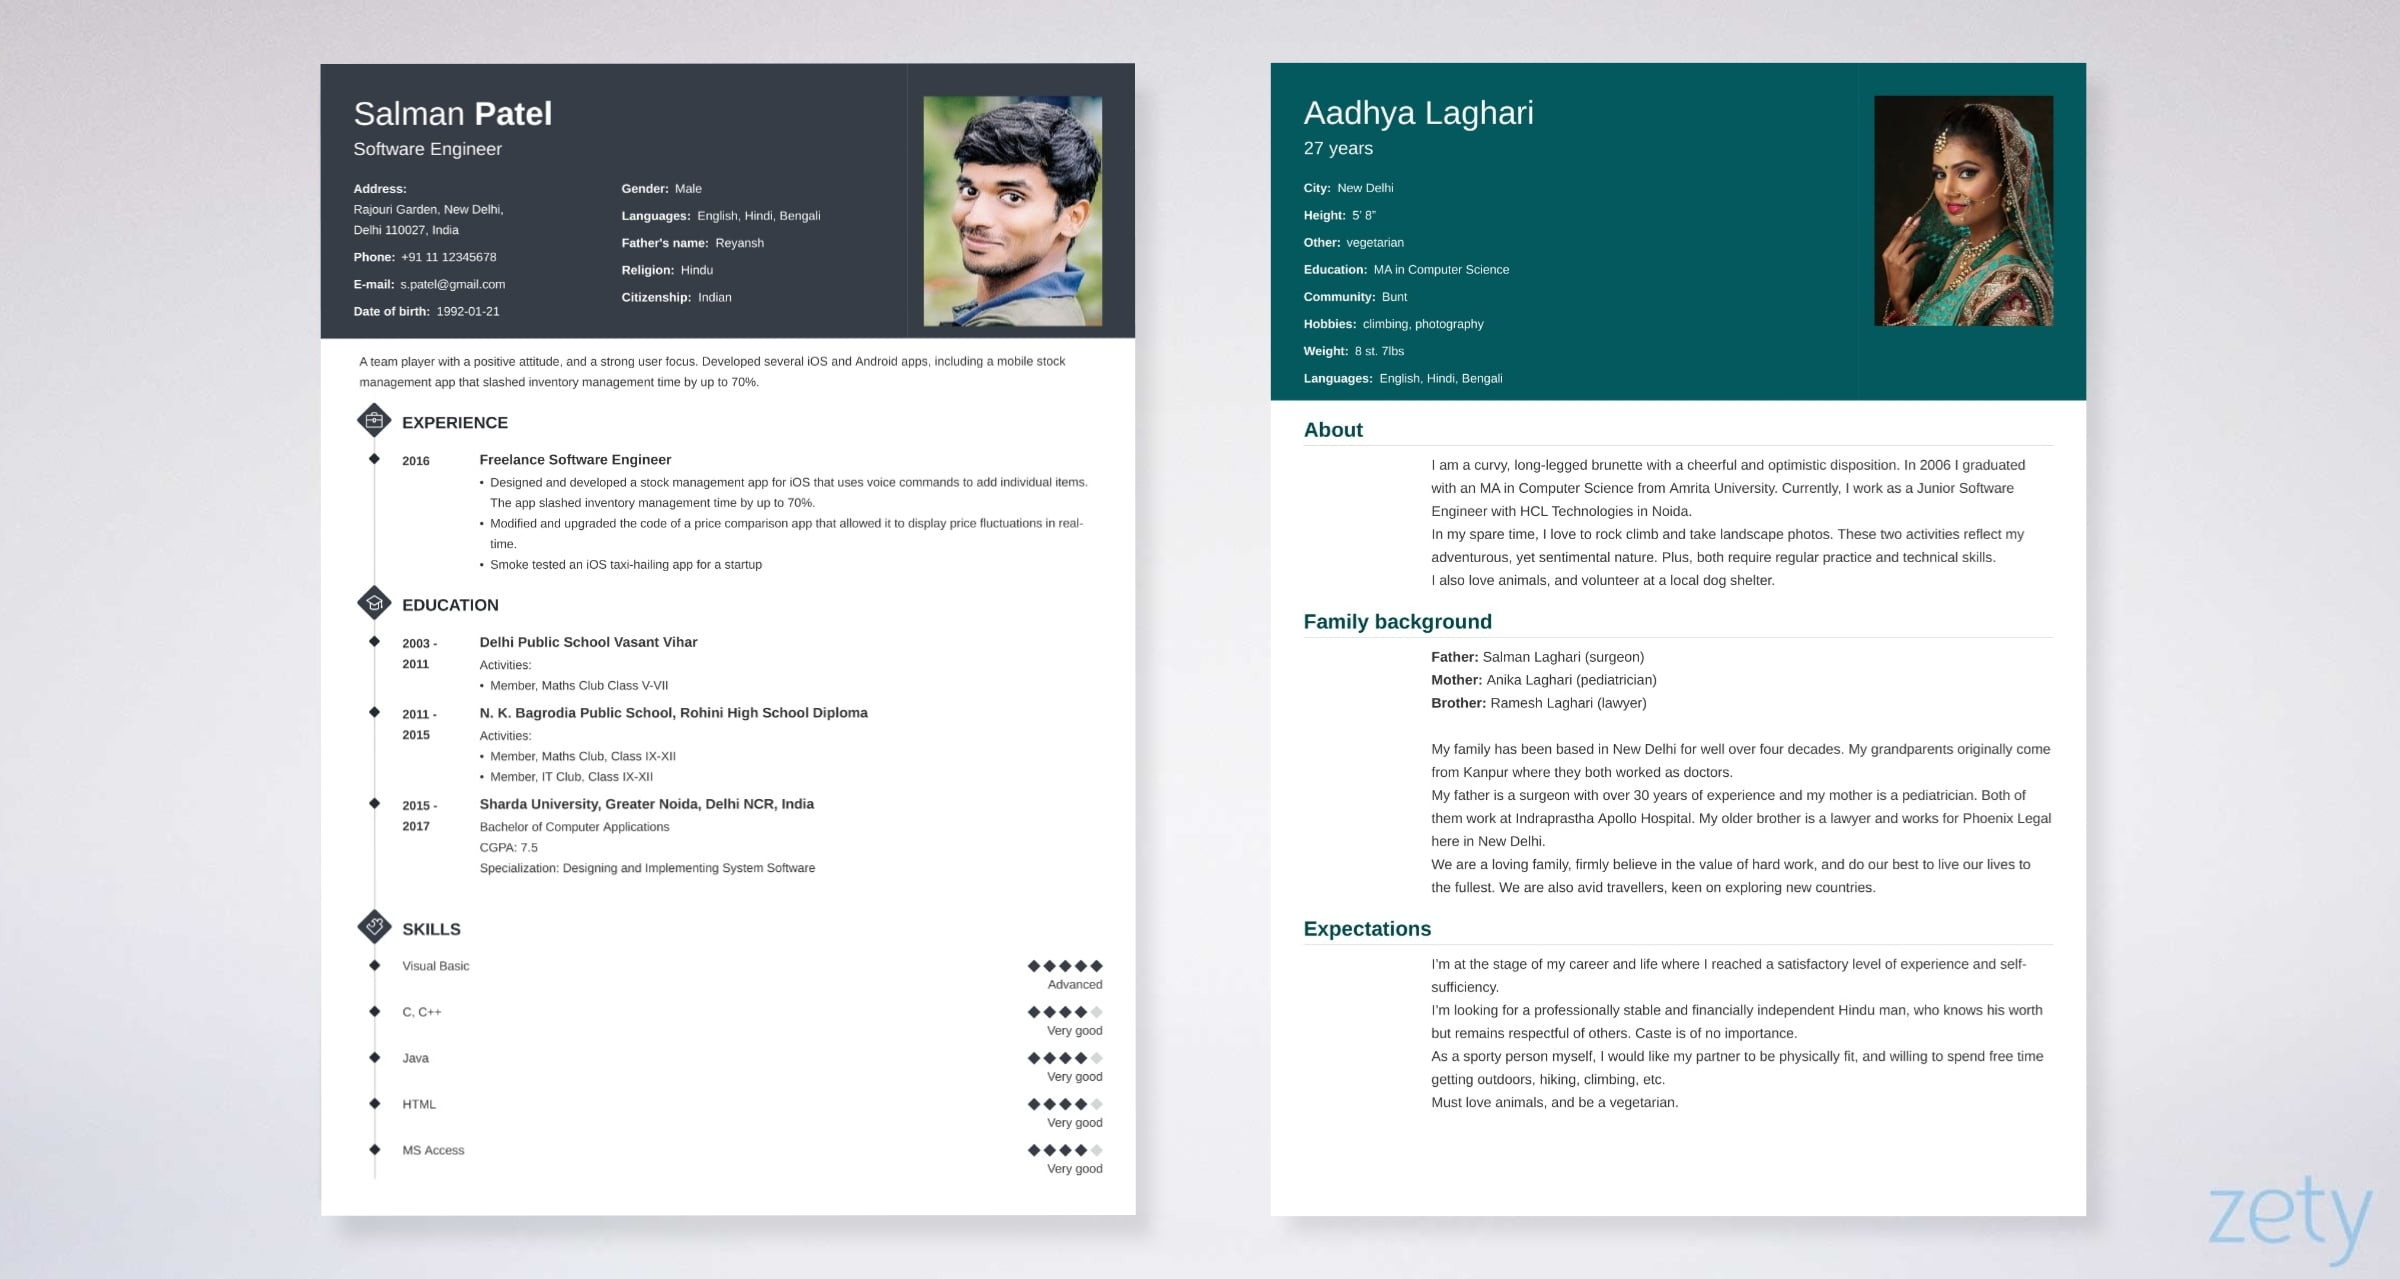 Biodata Template For Marriage Free FREE PRINTABLE TEMPLATES